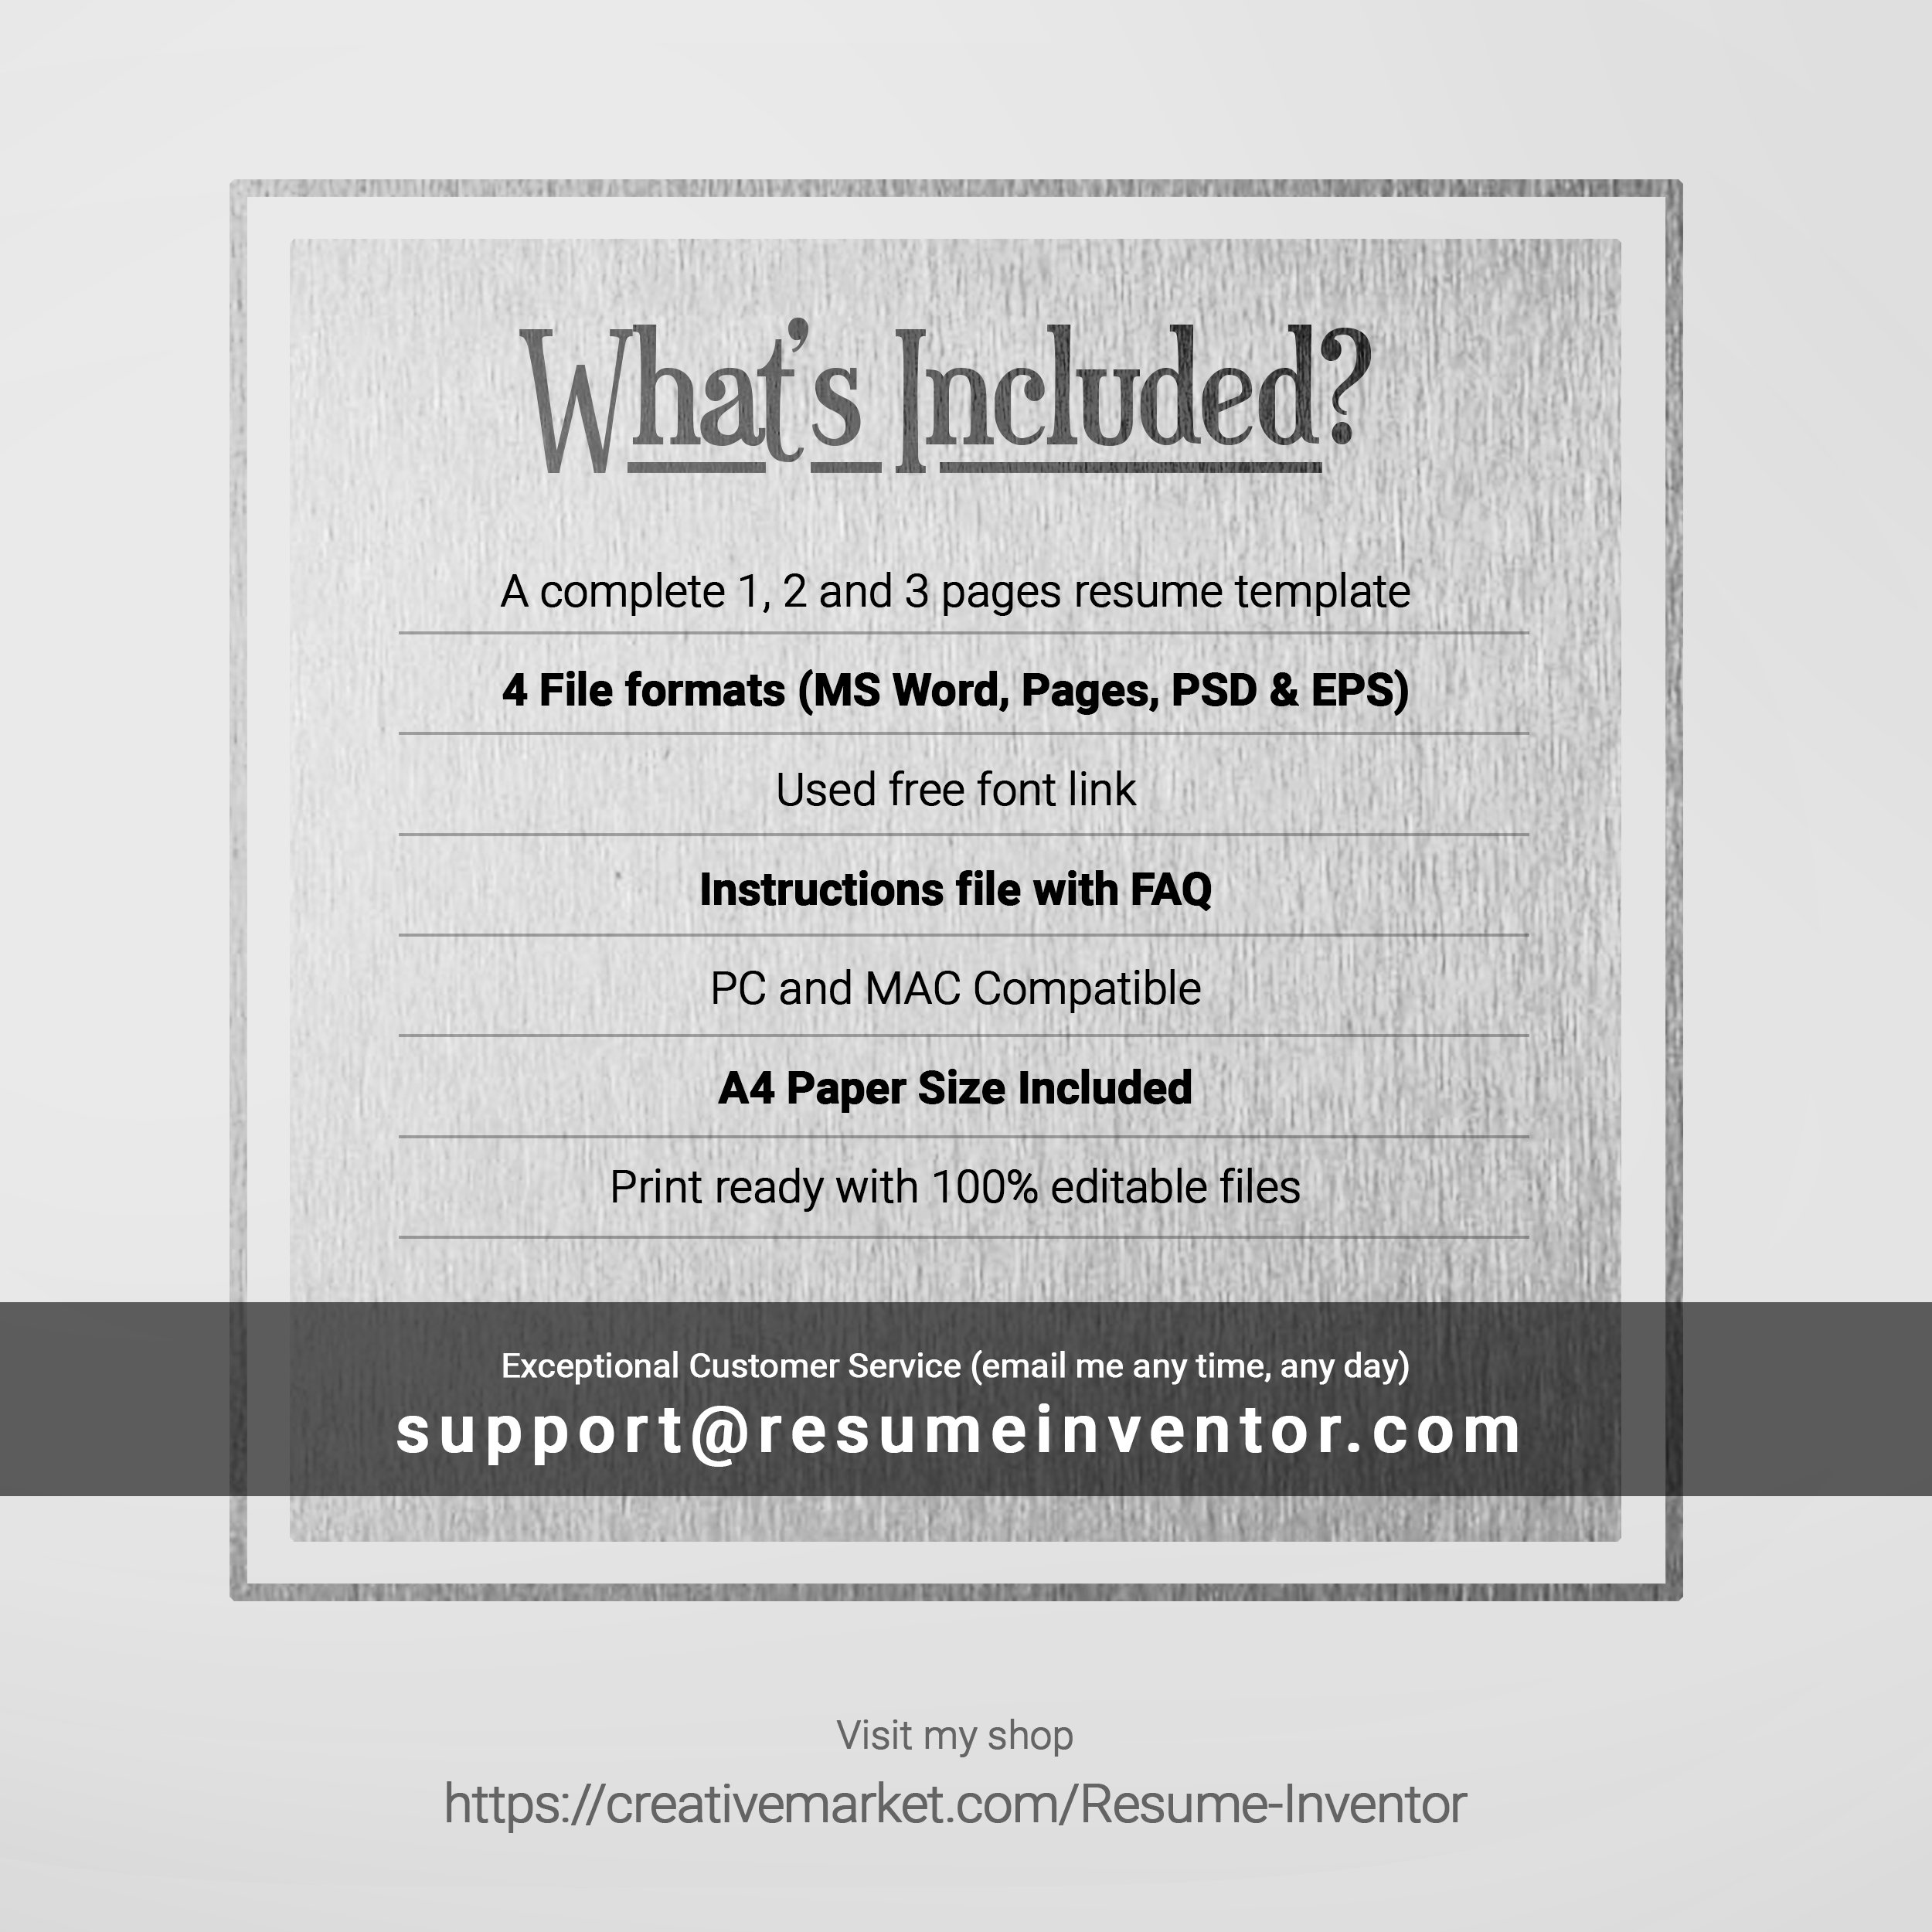 07 free resume template ms word file formats template includes 297